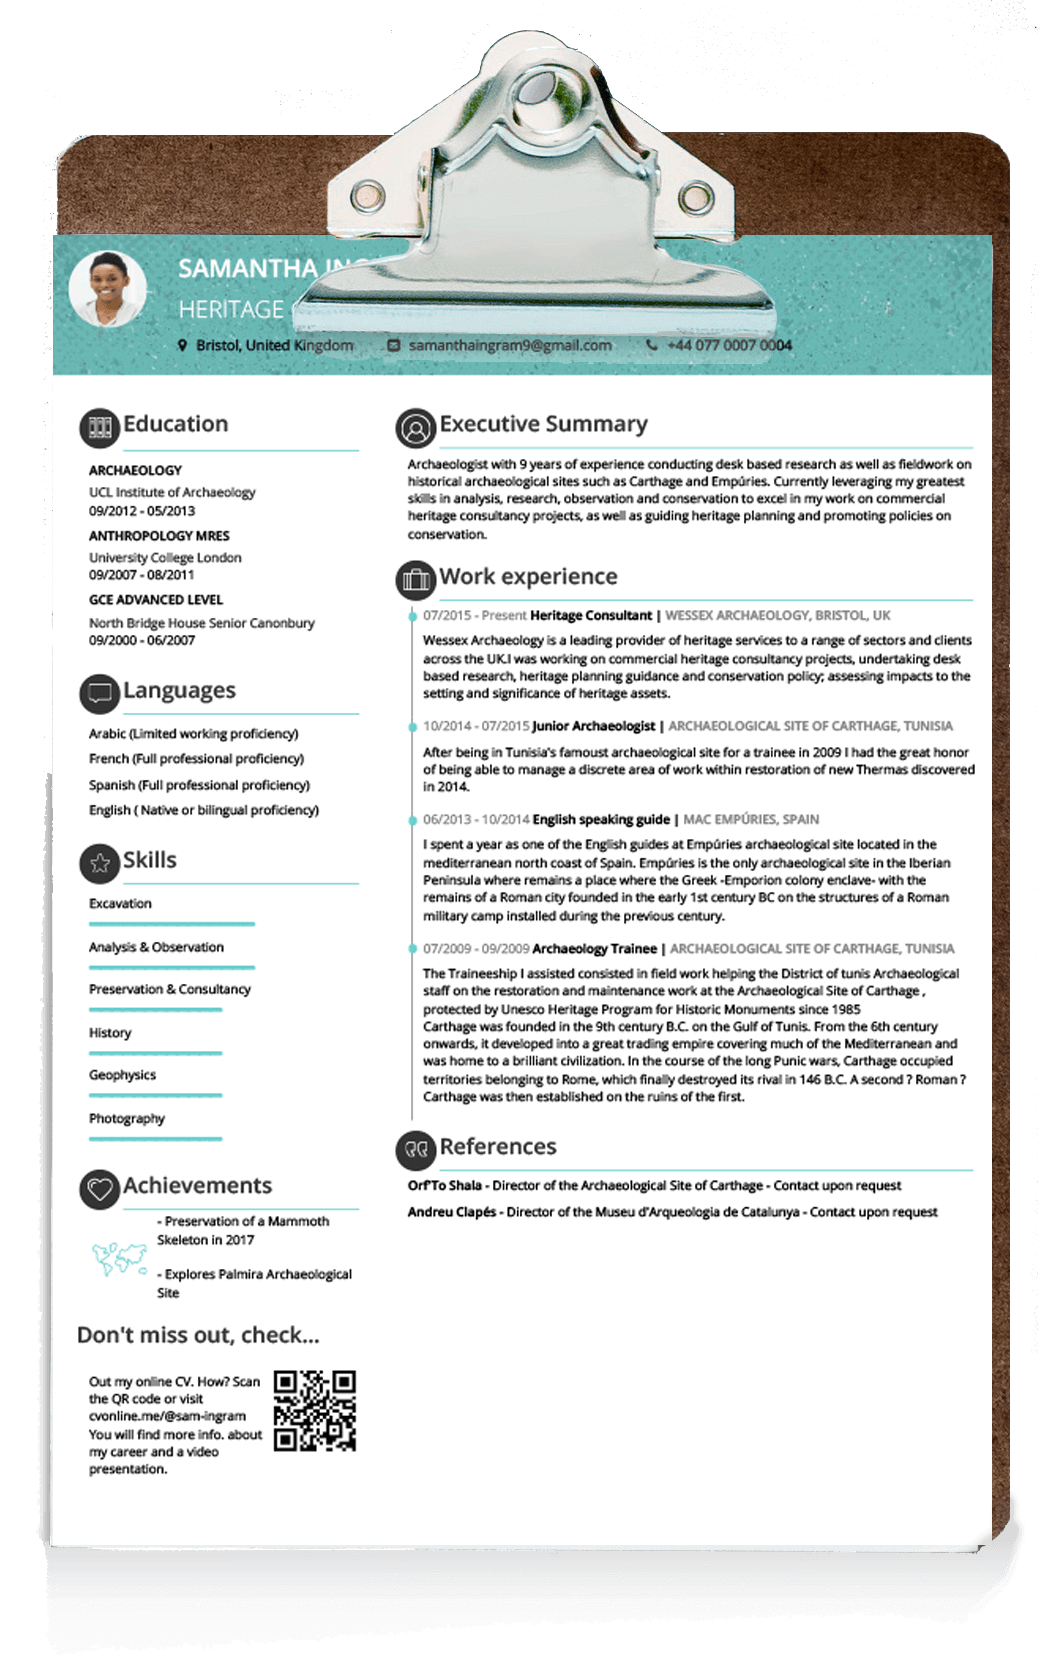 pdf-cv-templates-that-will-make-you-stand-out